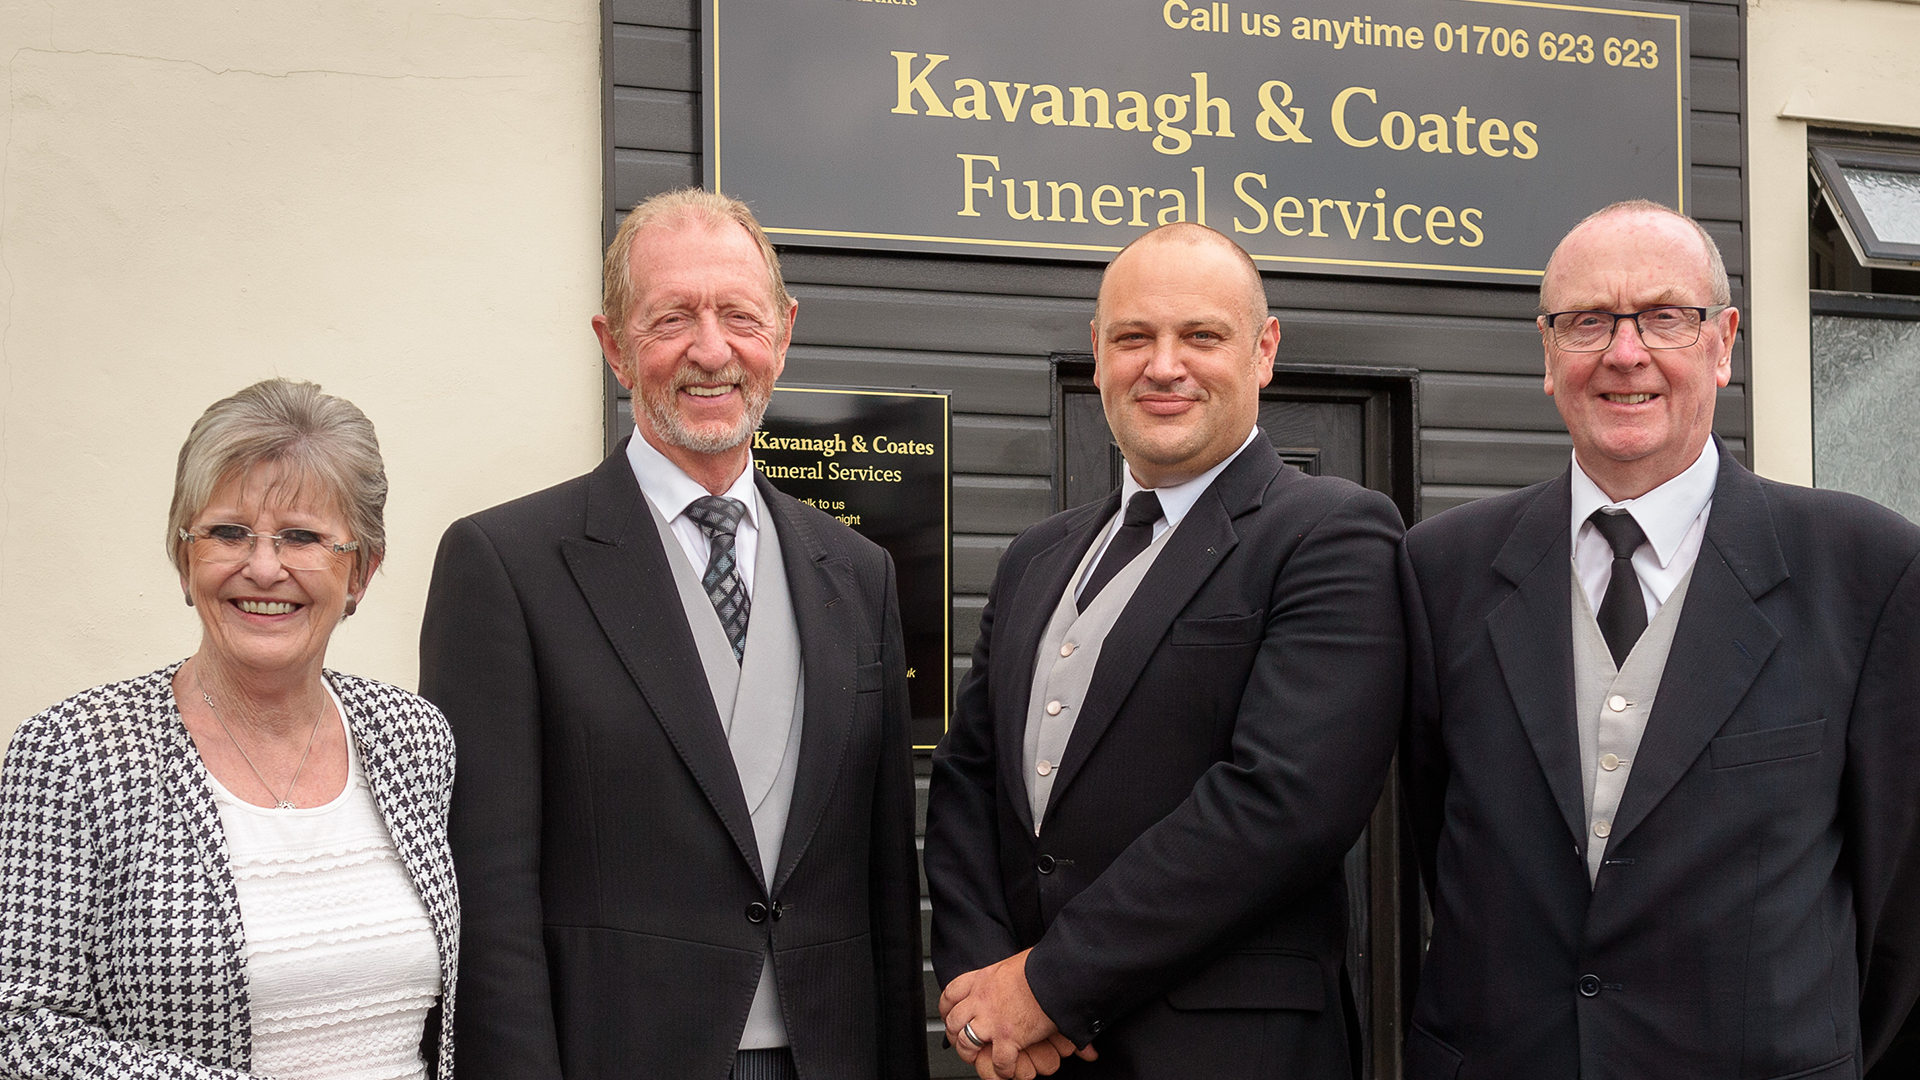 Kavanagh & Coates Funeral Services Heywood 01706 394883